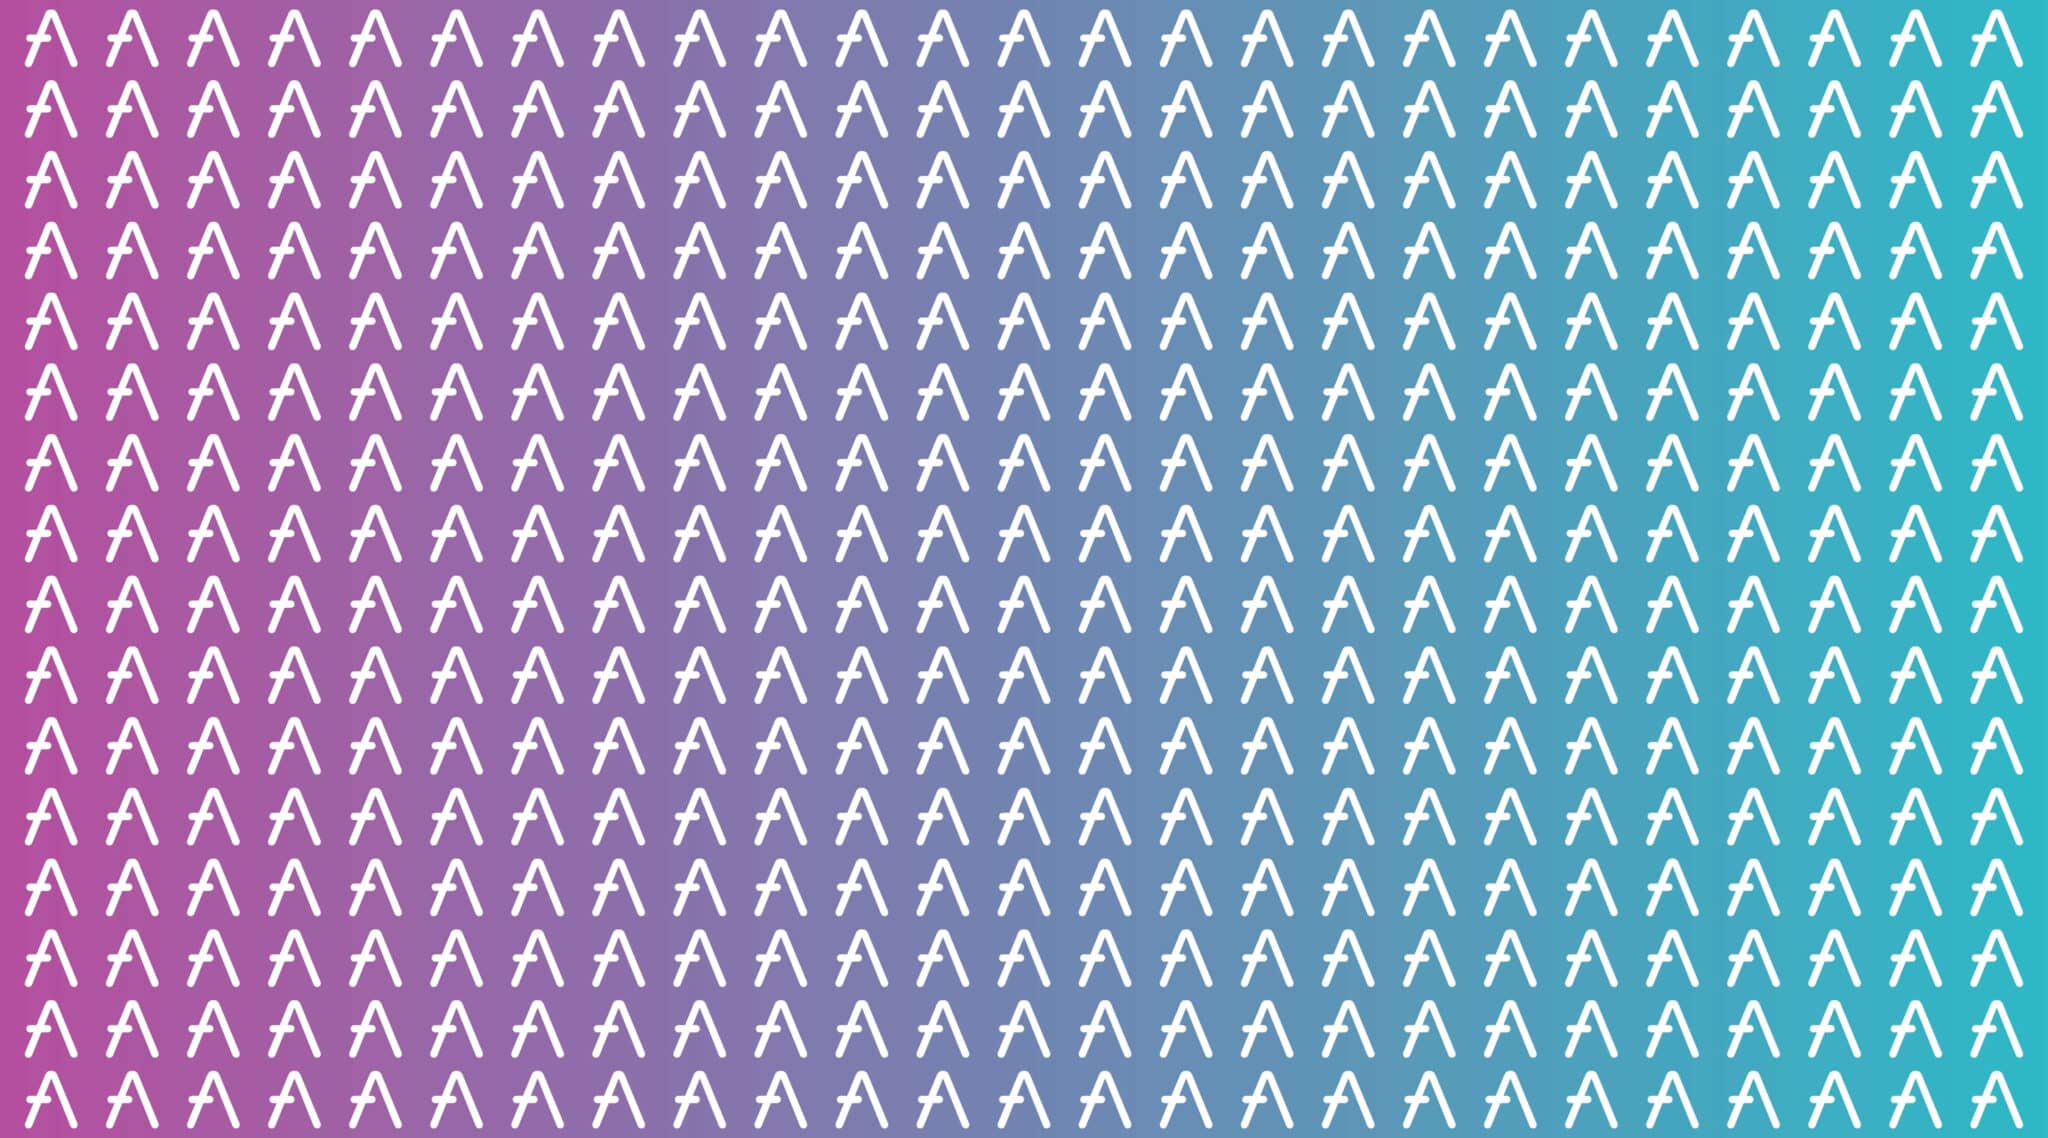 Repeating AAVE token on a gradient background.